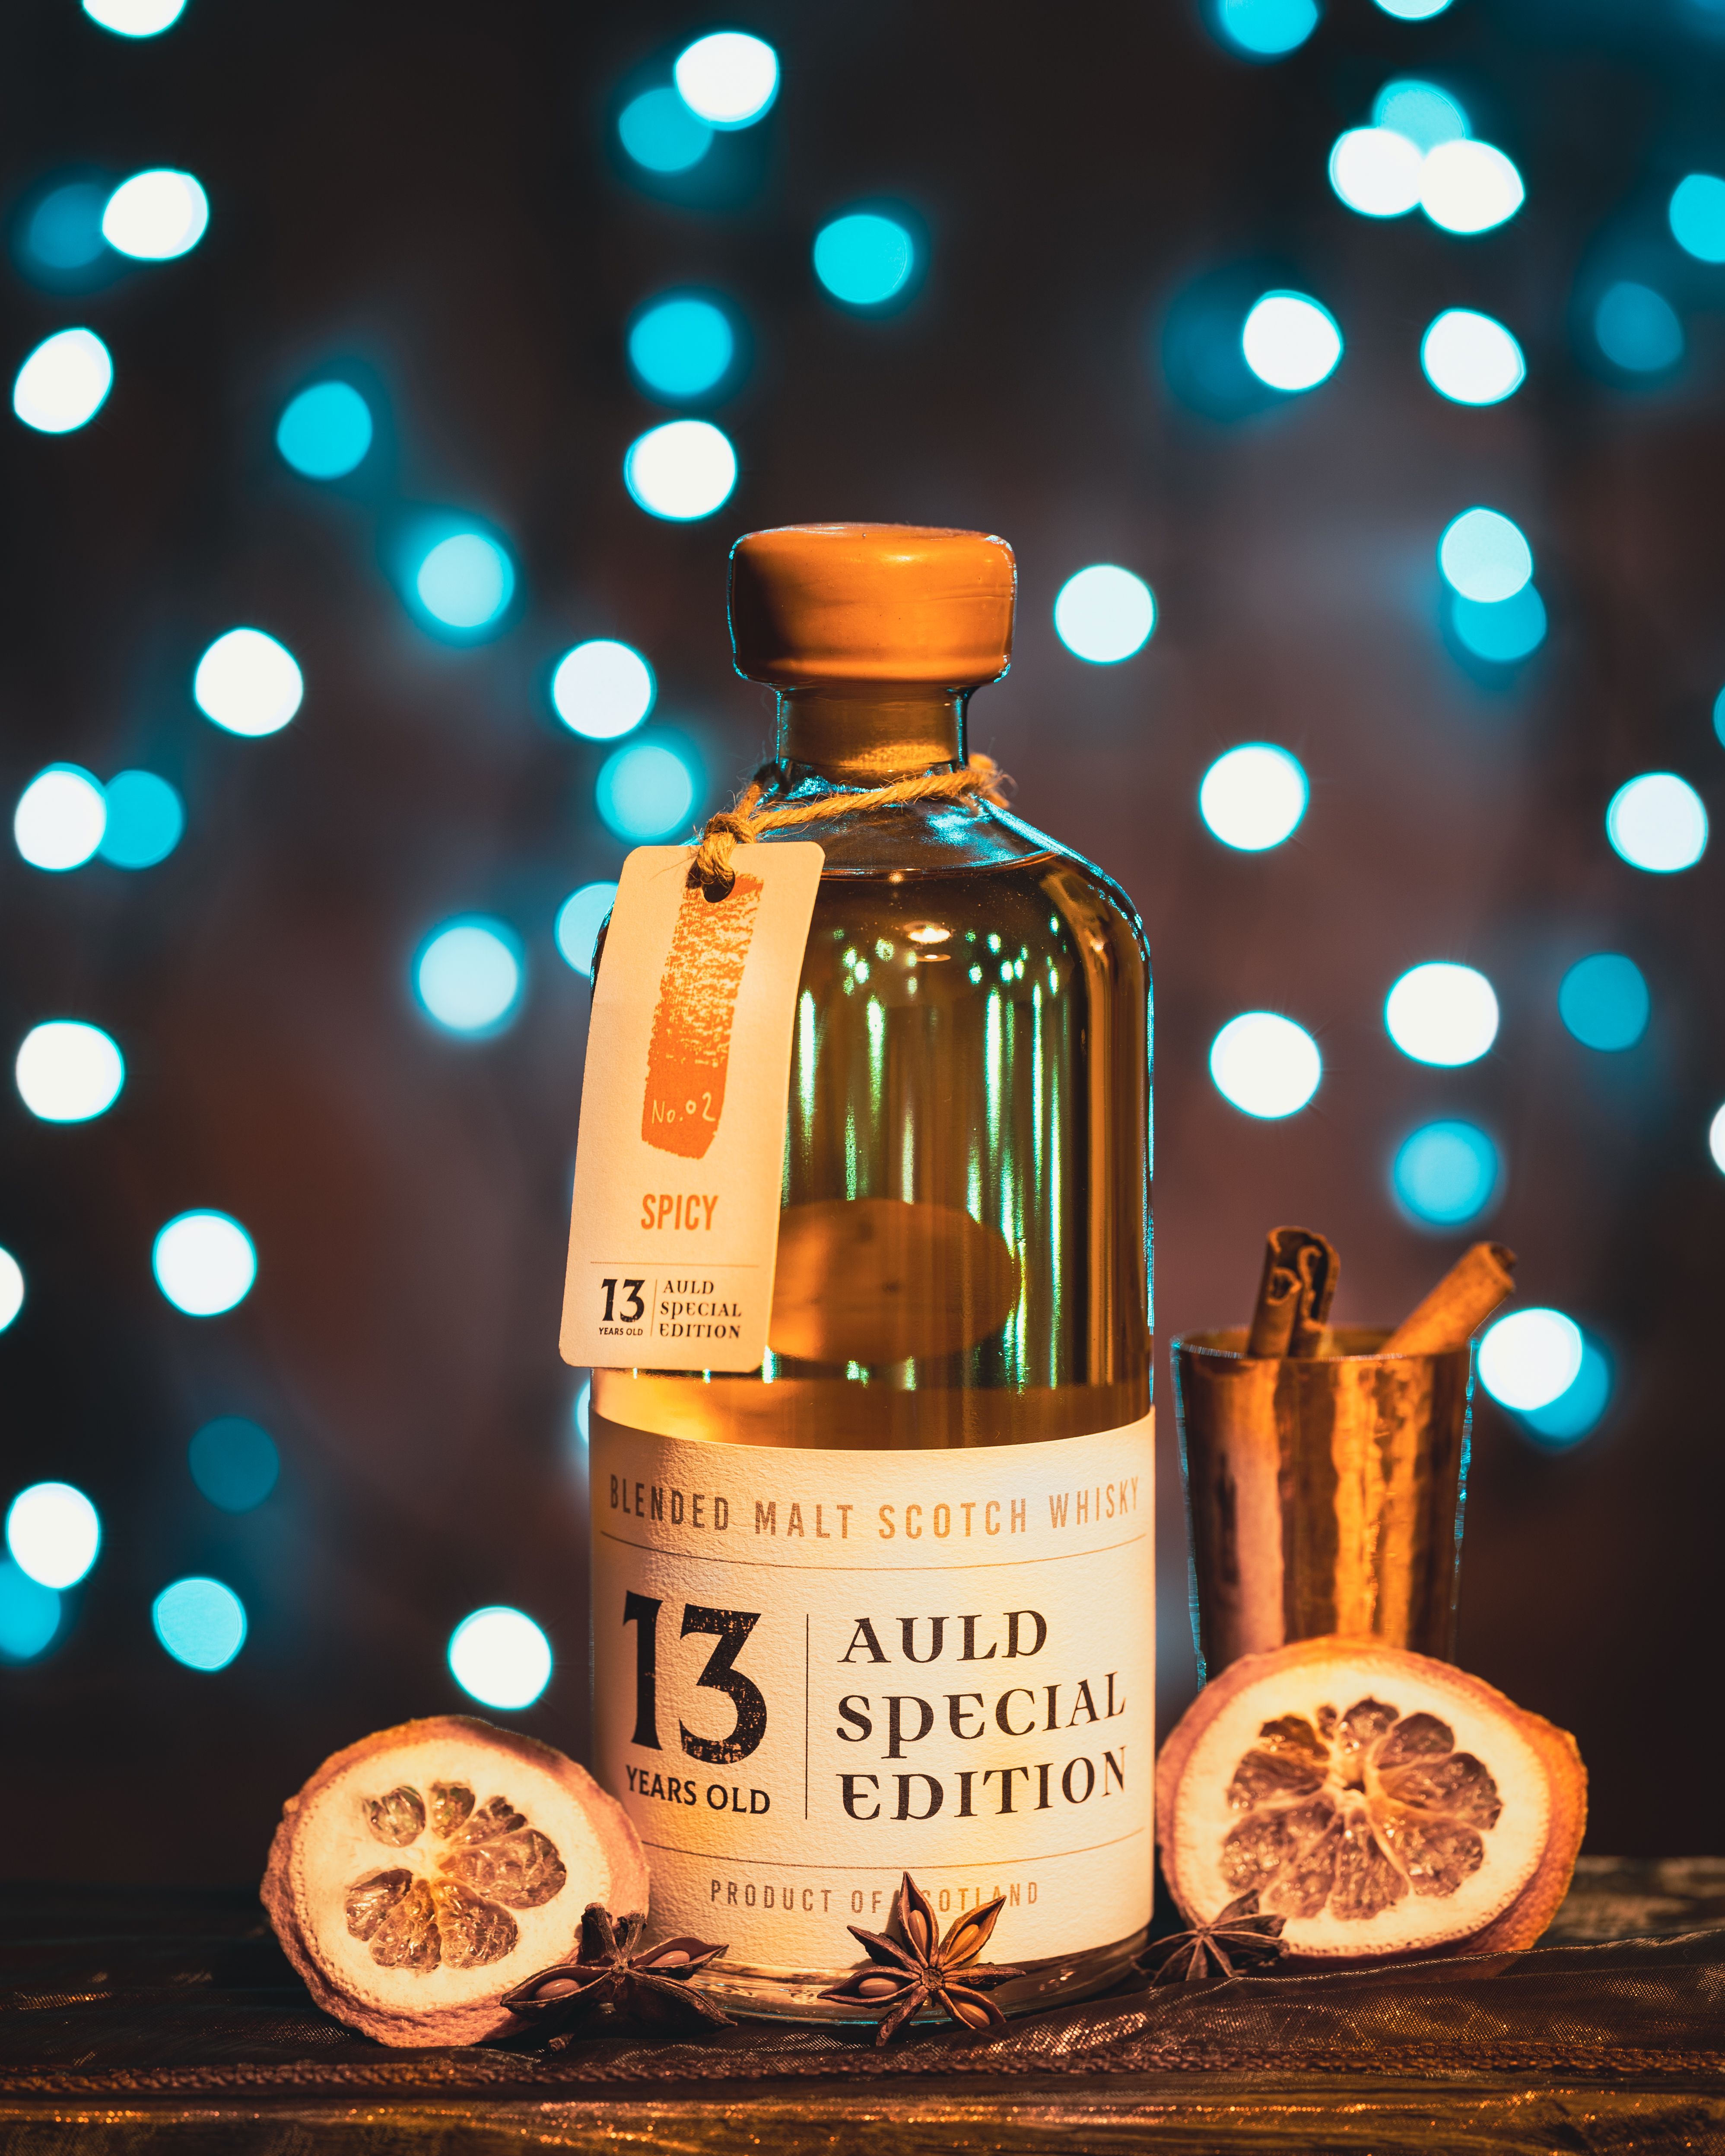 Auld Special Edition Spicy 13 Year Old Blended Malt Scotch